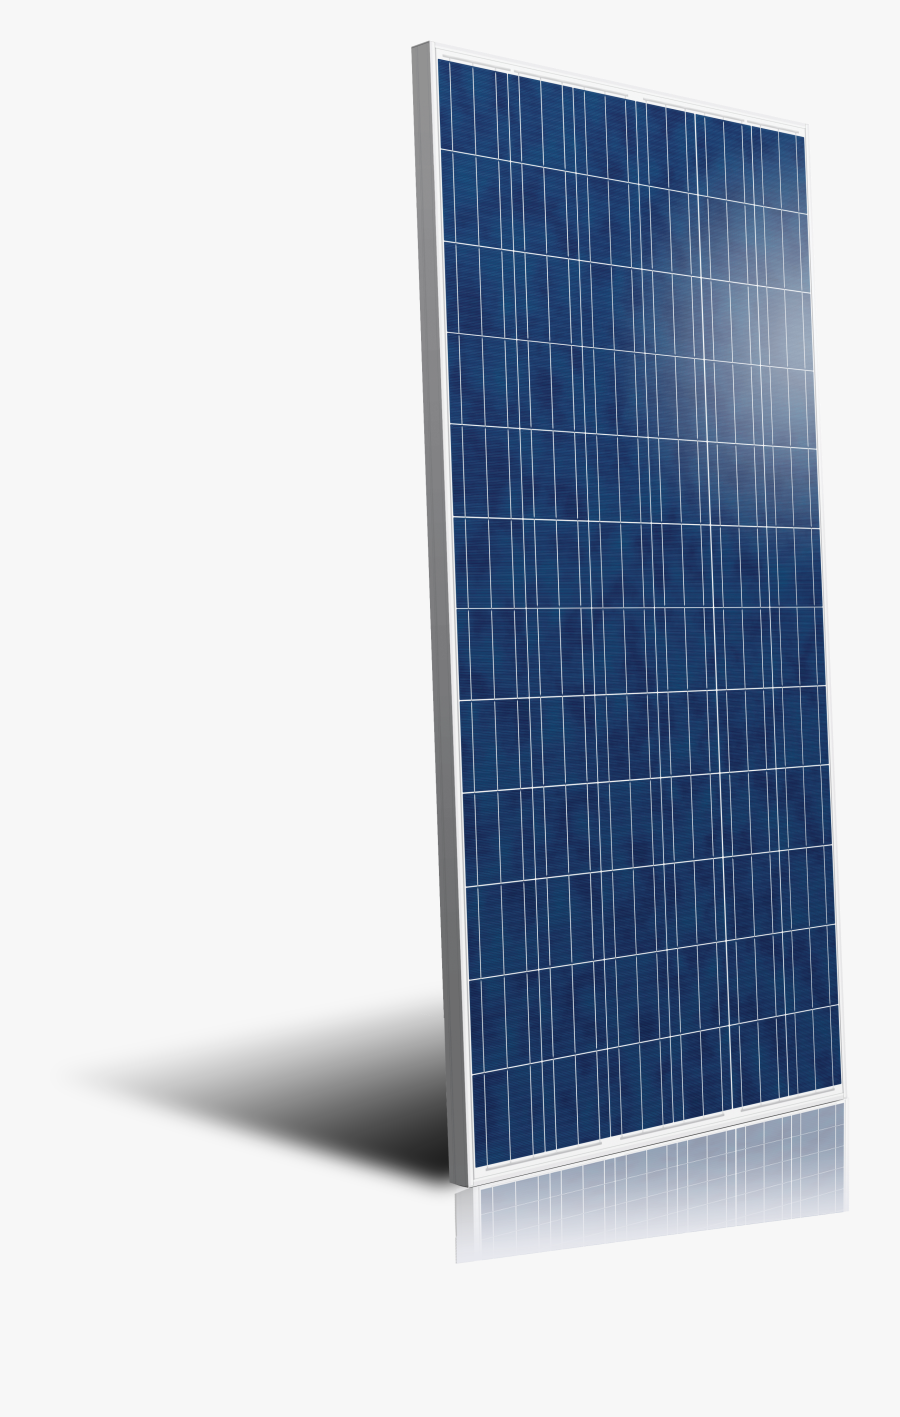 Png Images, Pngs, Solar, Solar Panel, Solar Panels, - Solar Panel Transparent Background, Transparent Clipart